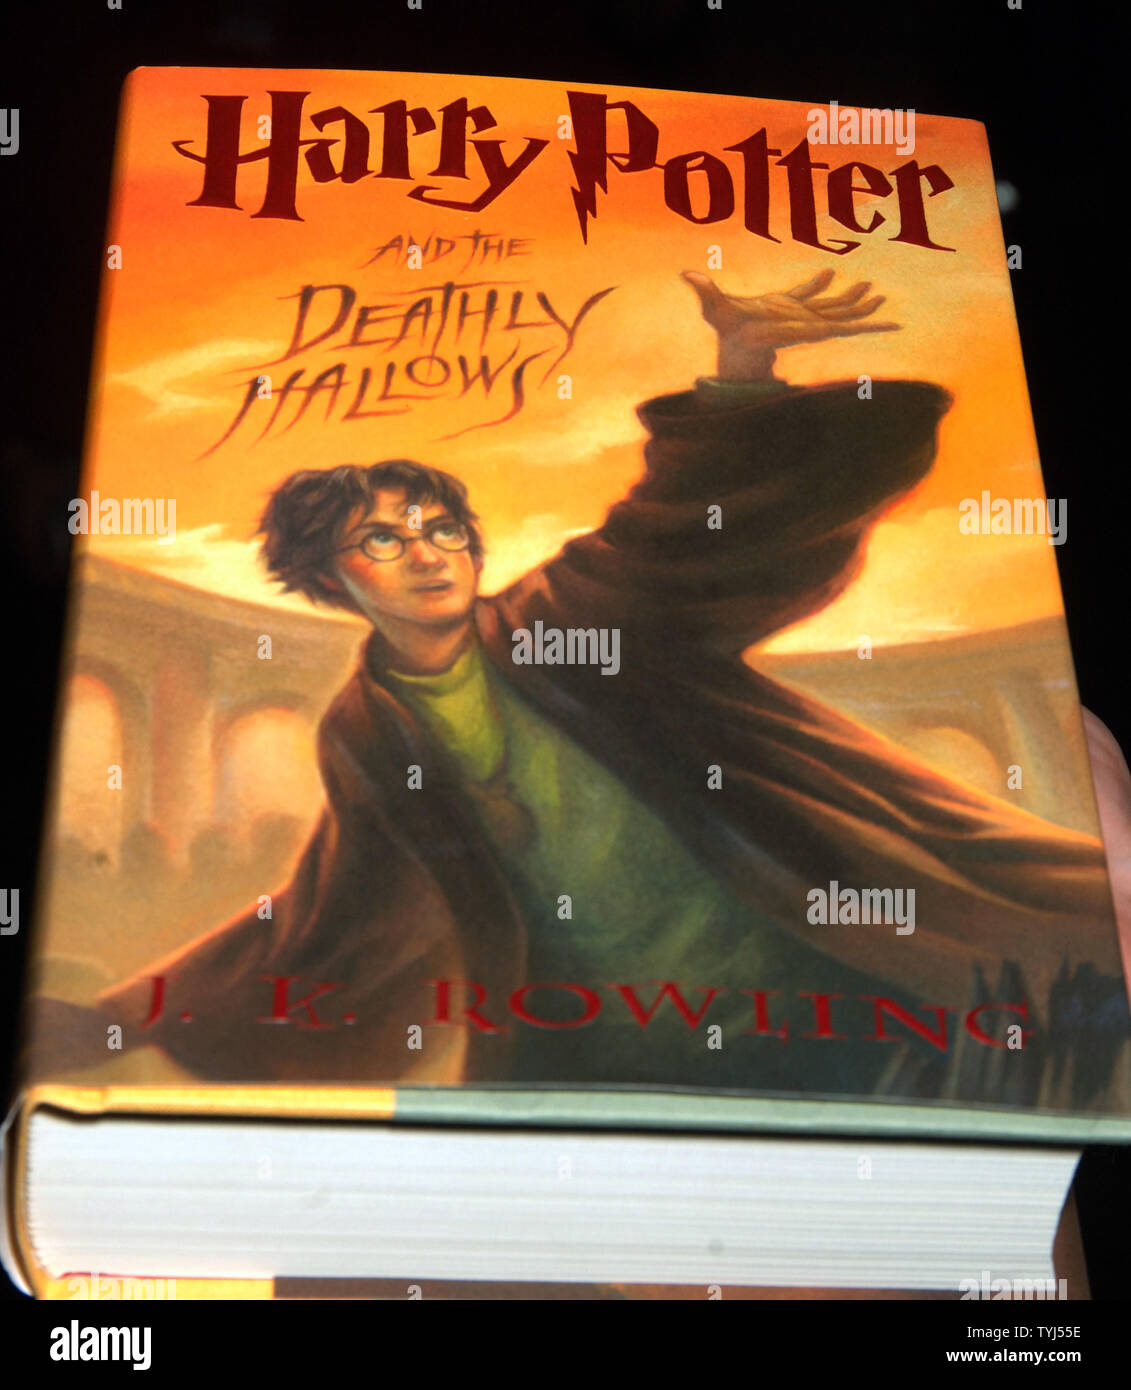 7th harry potter book